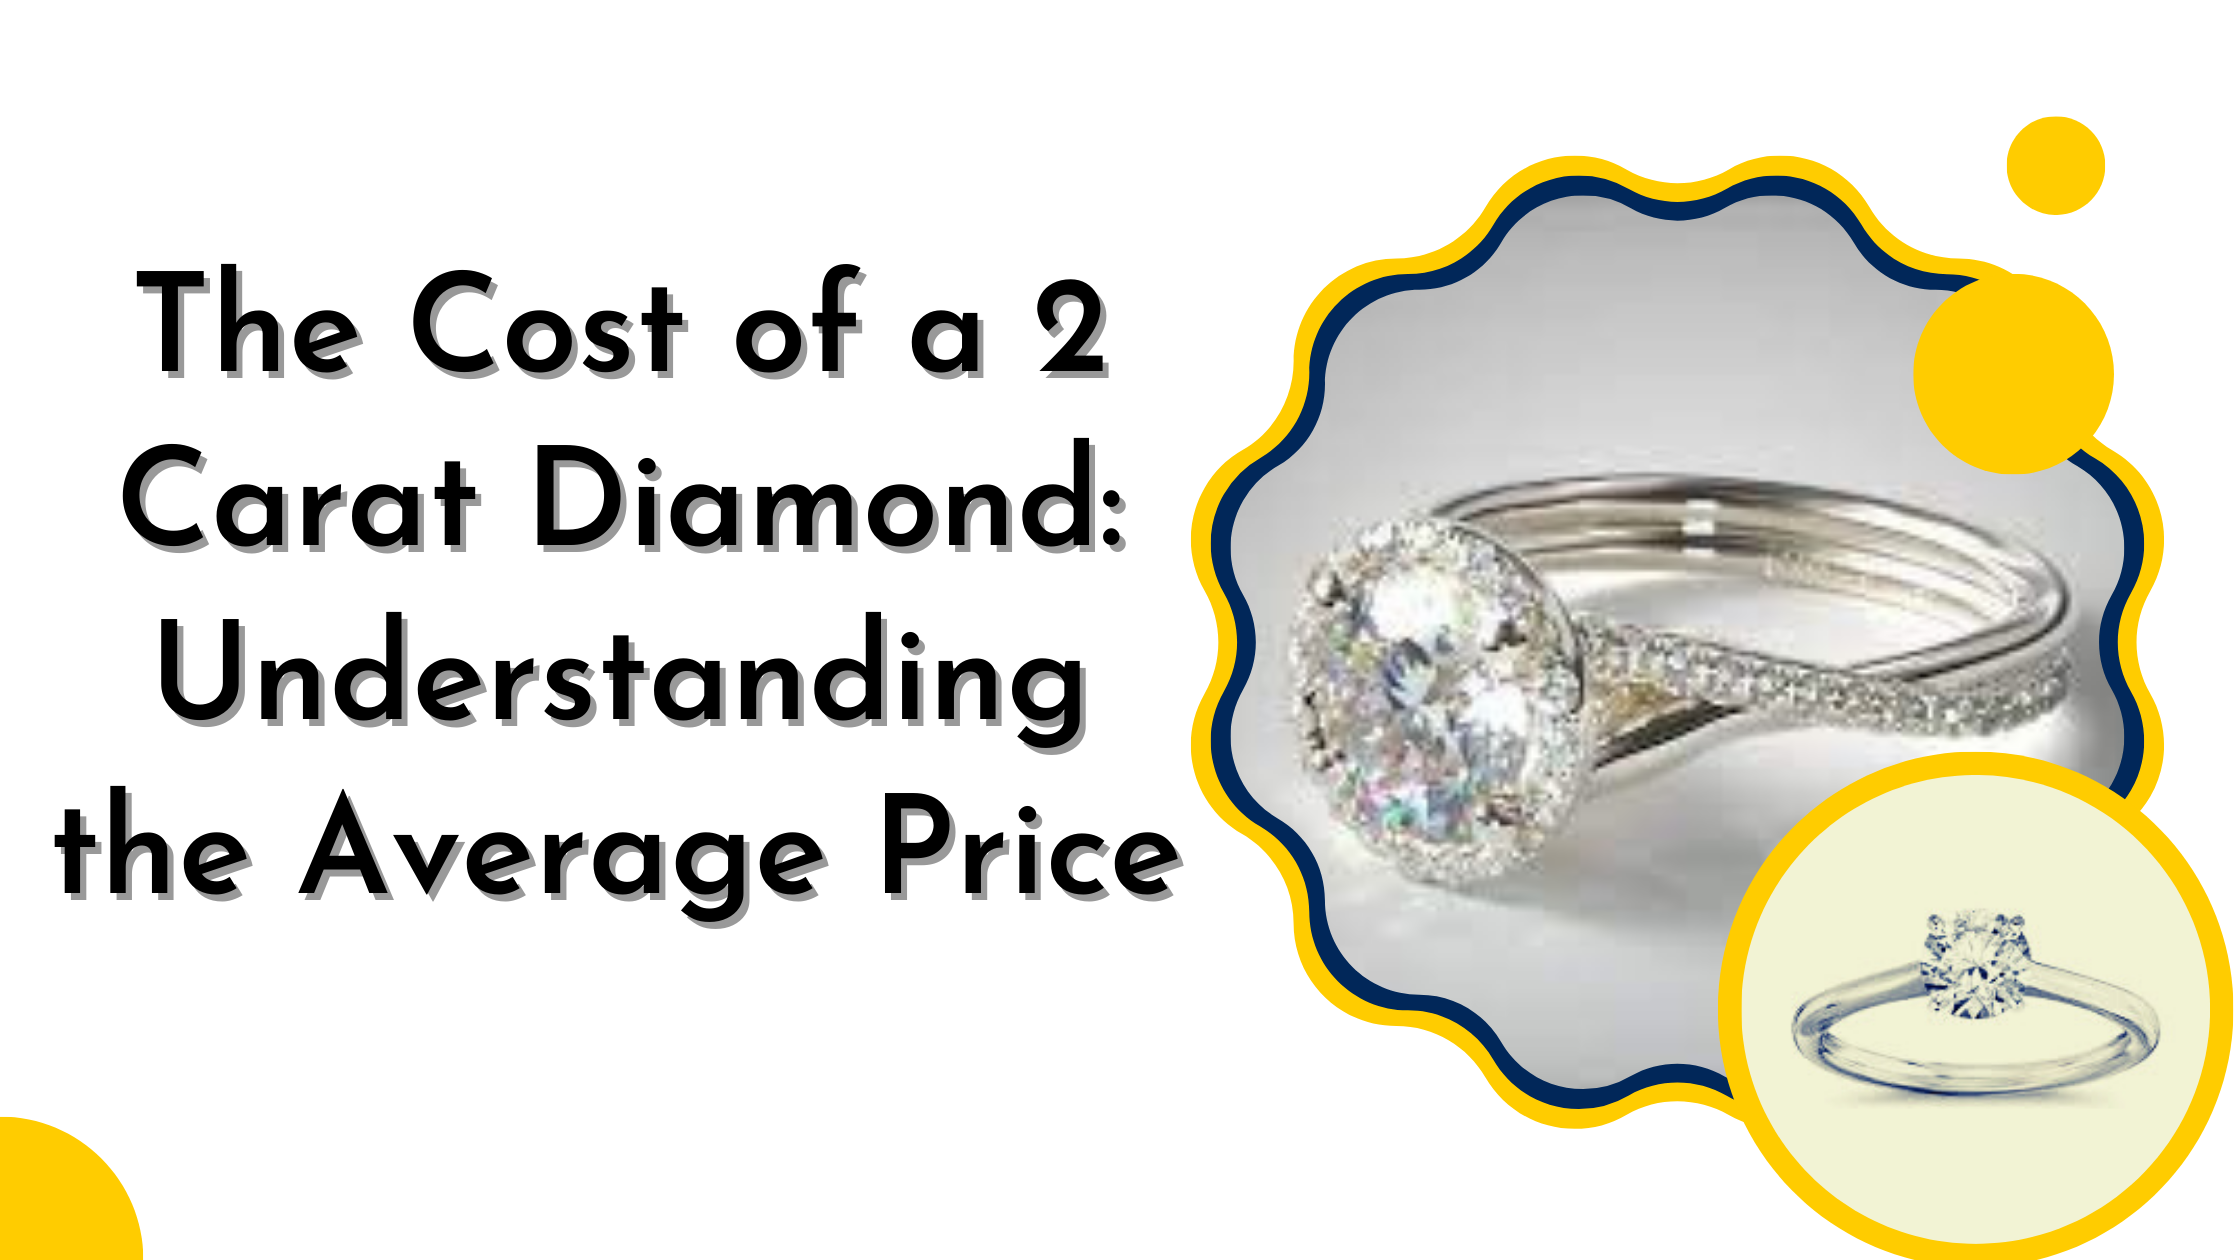 public/uploads/2023/01/The-Cost-of-a-2-Carat-Diamond-Understanding-the-Average-Price-1.png